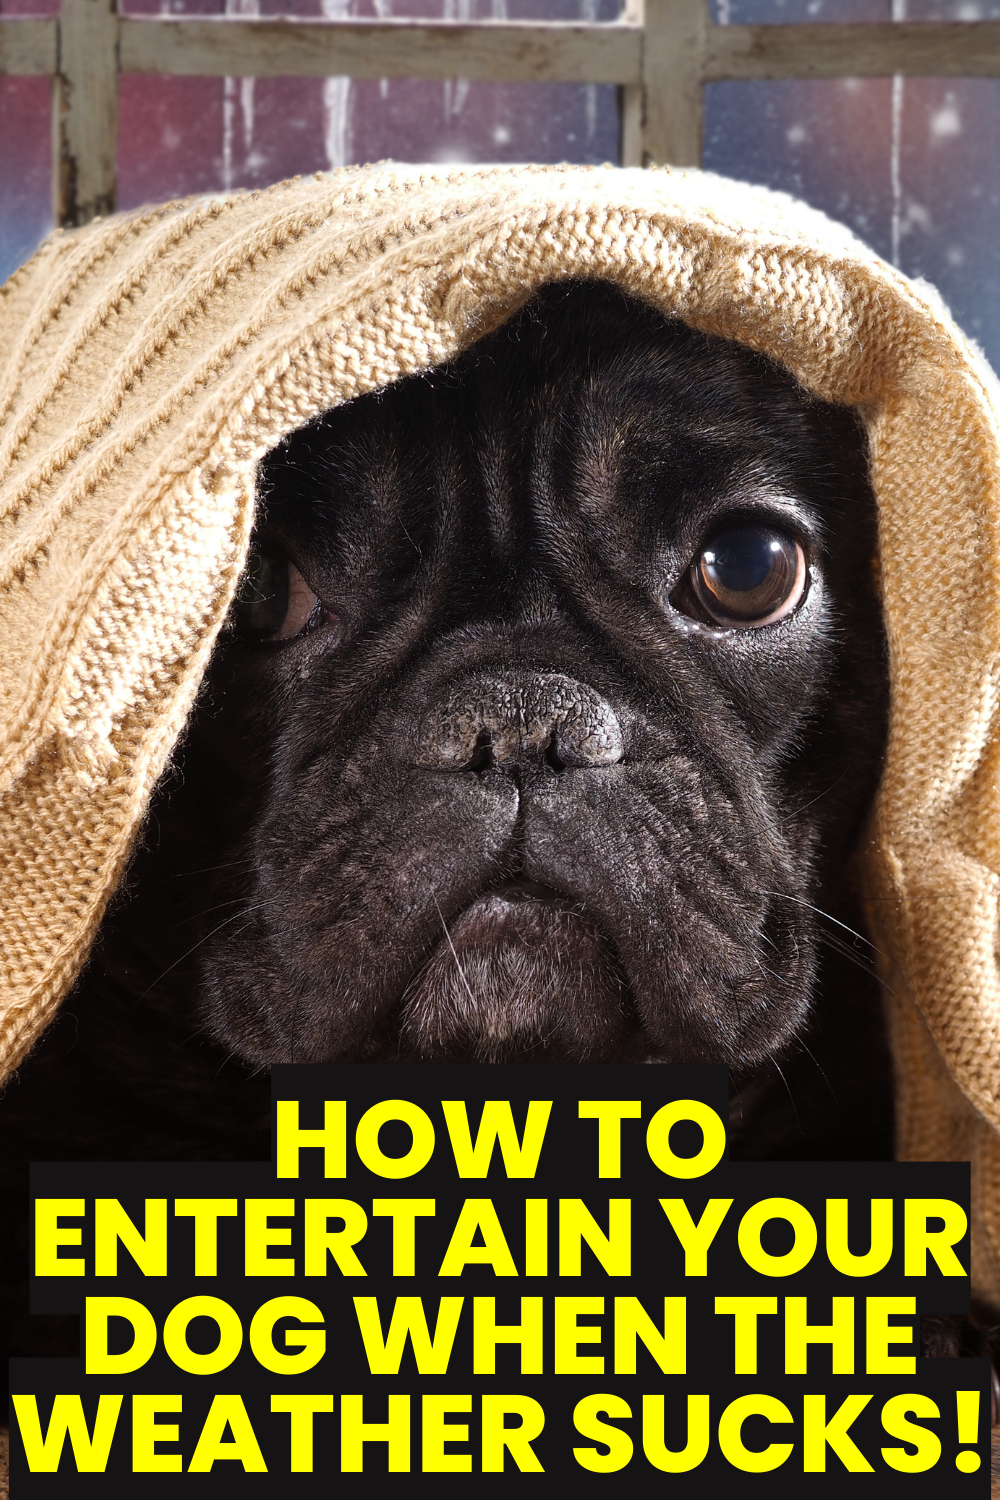 7 ways to entertain your dog when it's cold outside